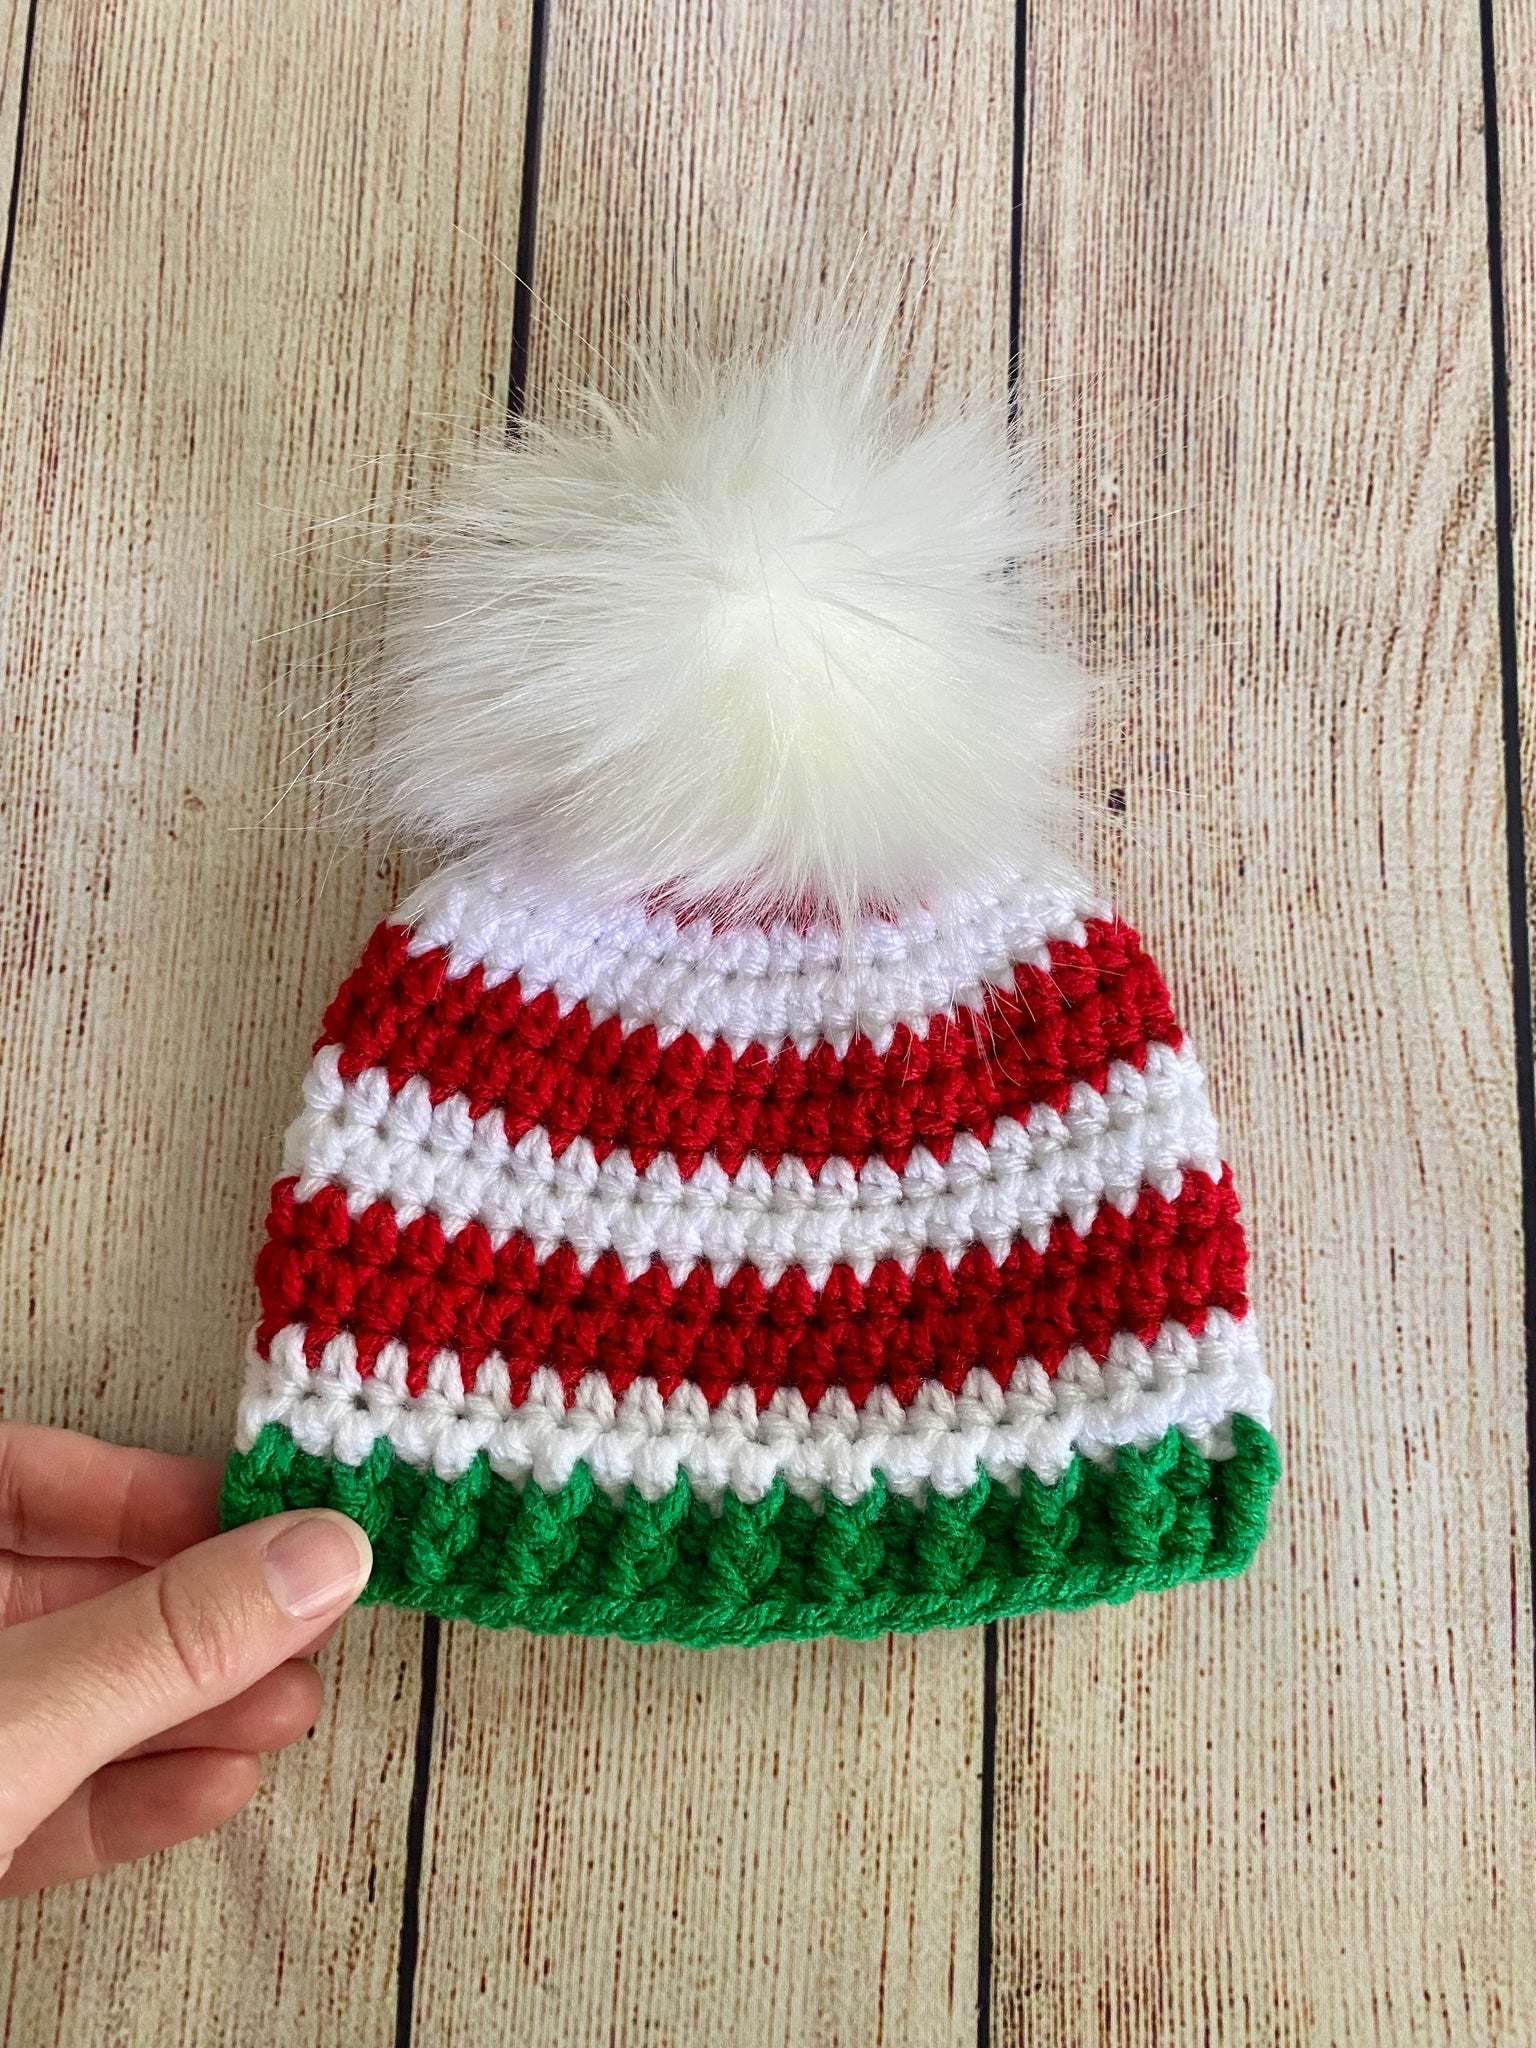 Red, white, and green faux fur pom pom striped Christmas hat by Two Seaside Babes